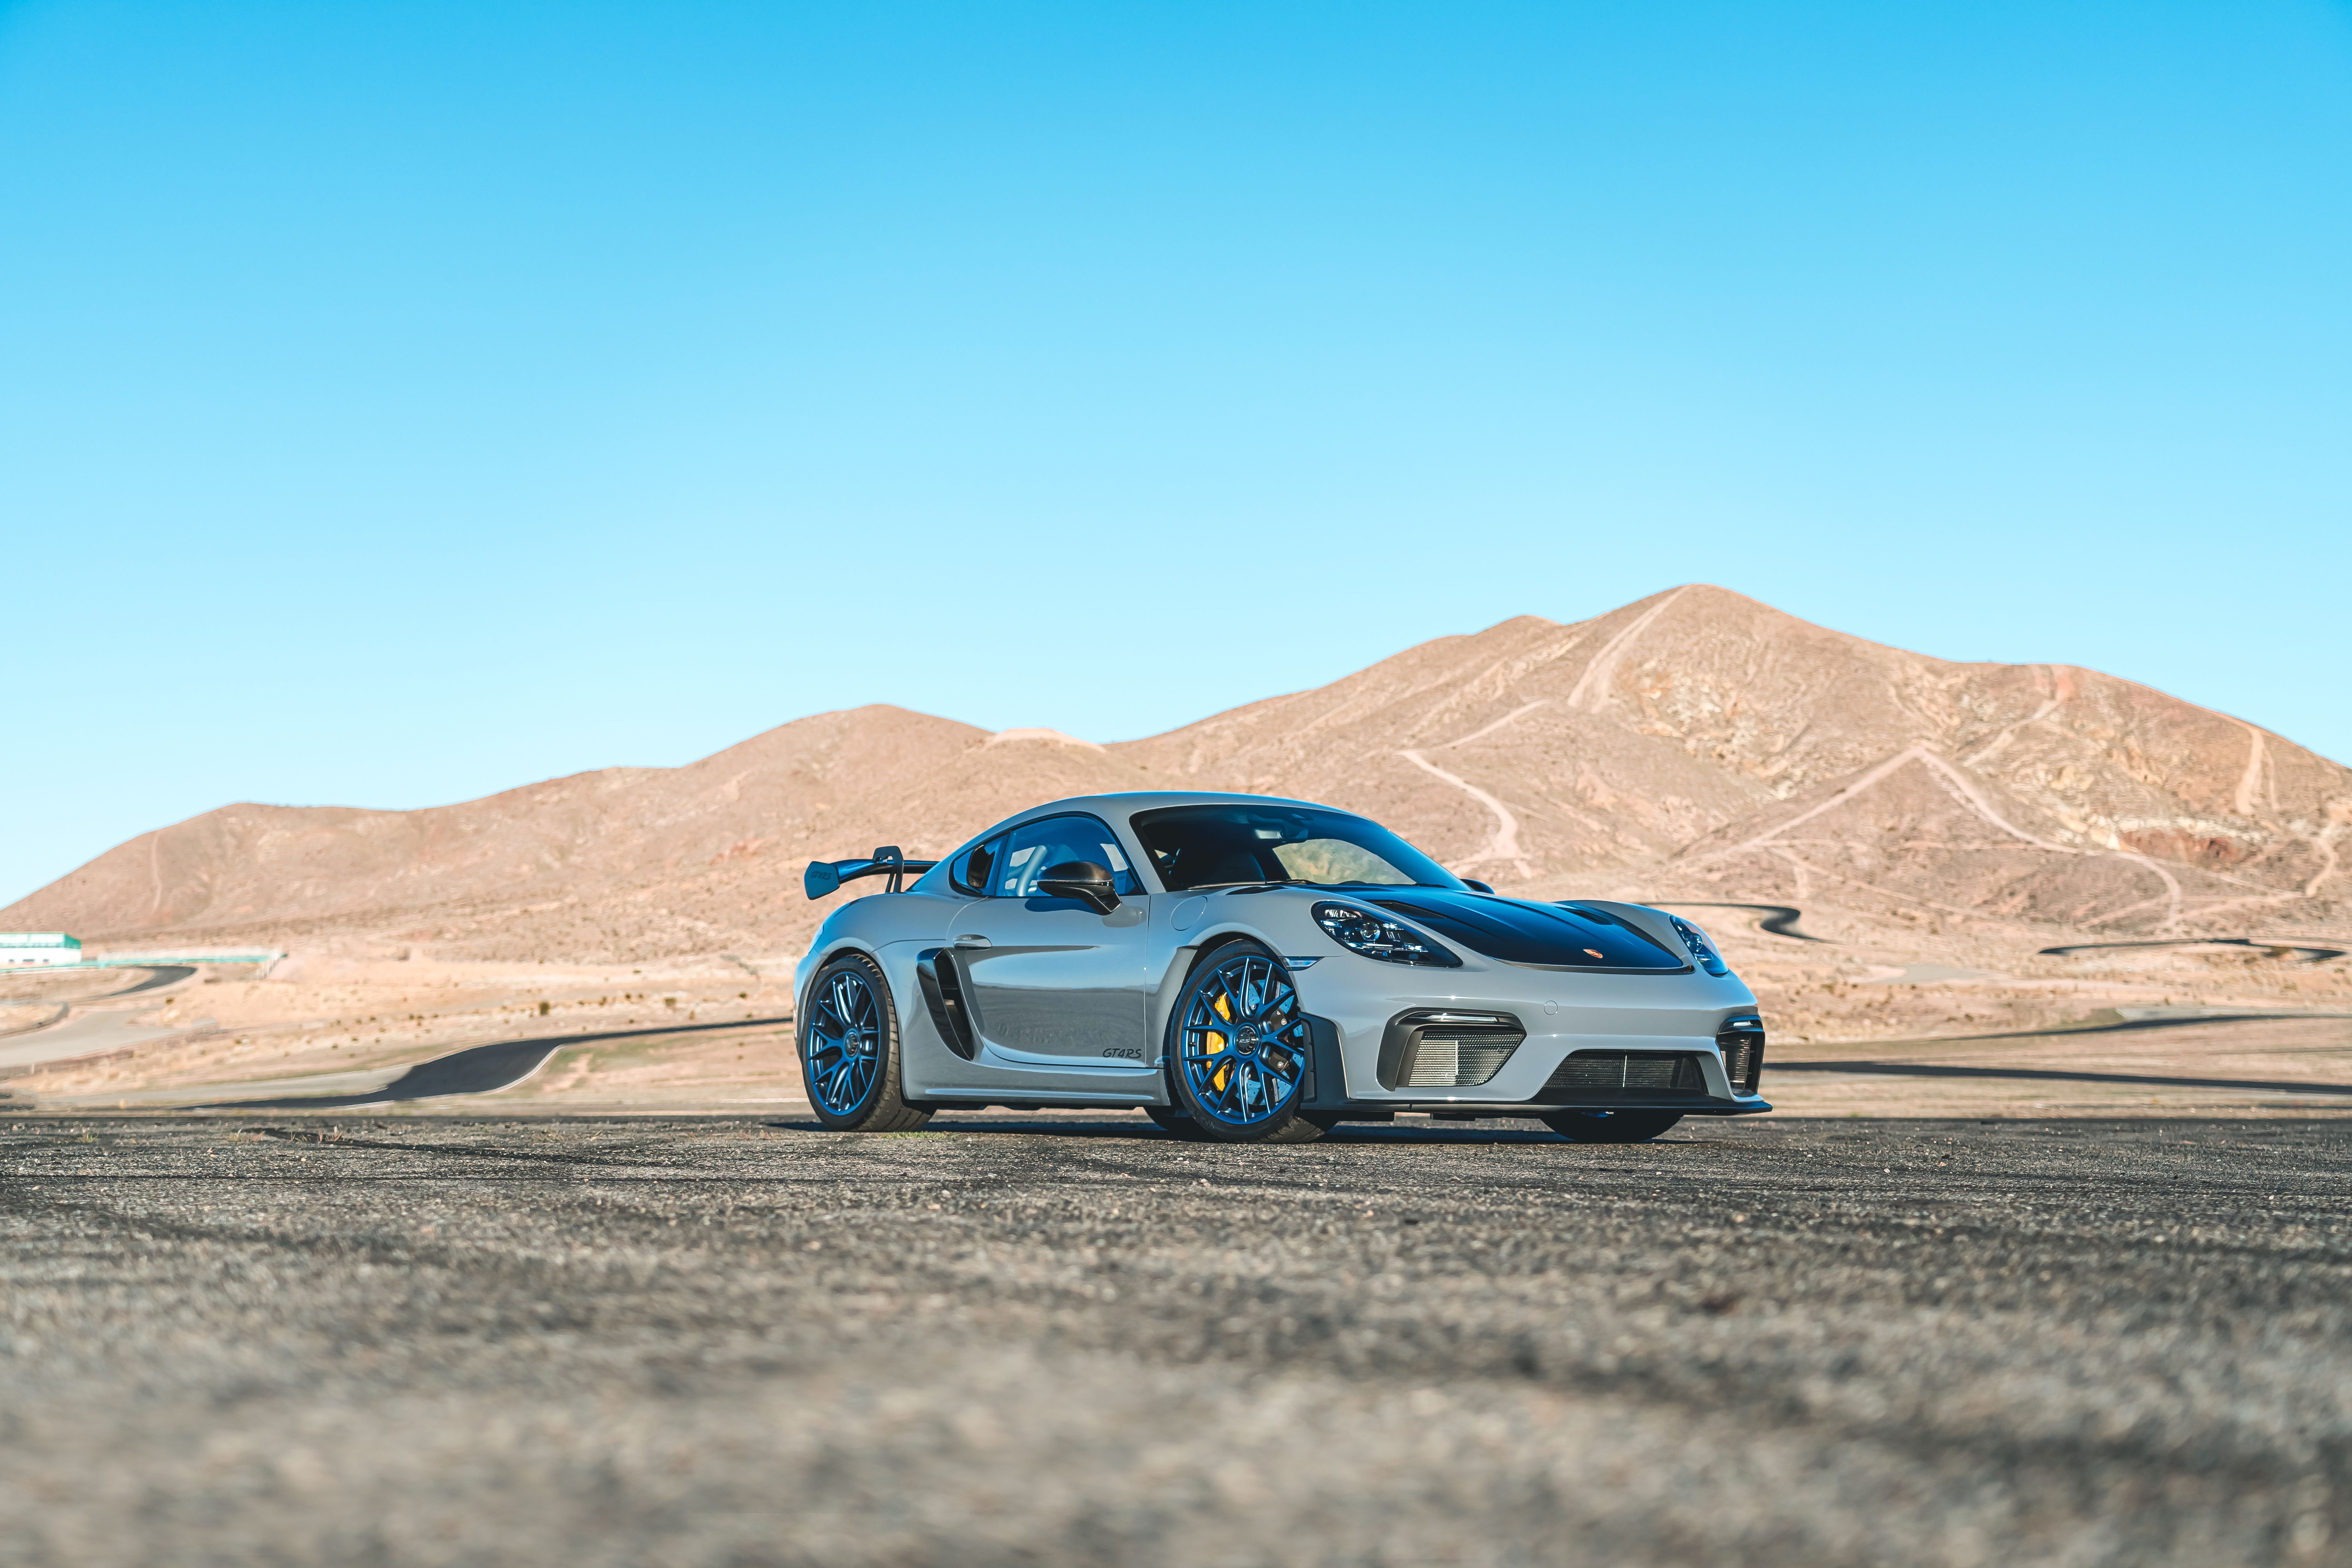 The Porsche Cayman GT4 RS parked on the track. 